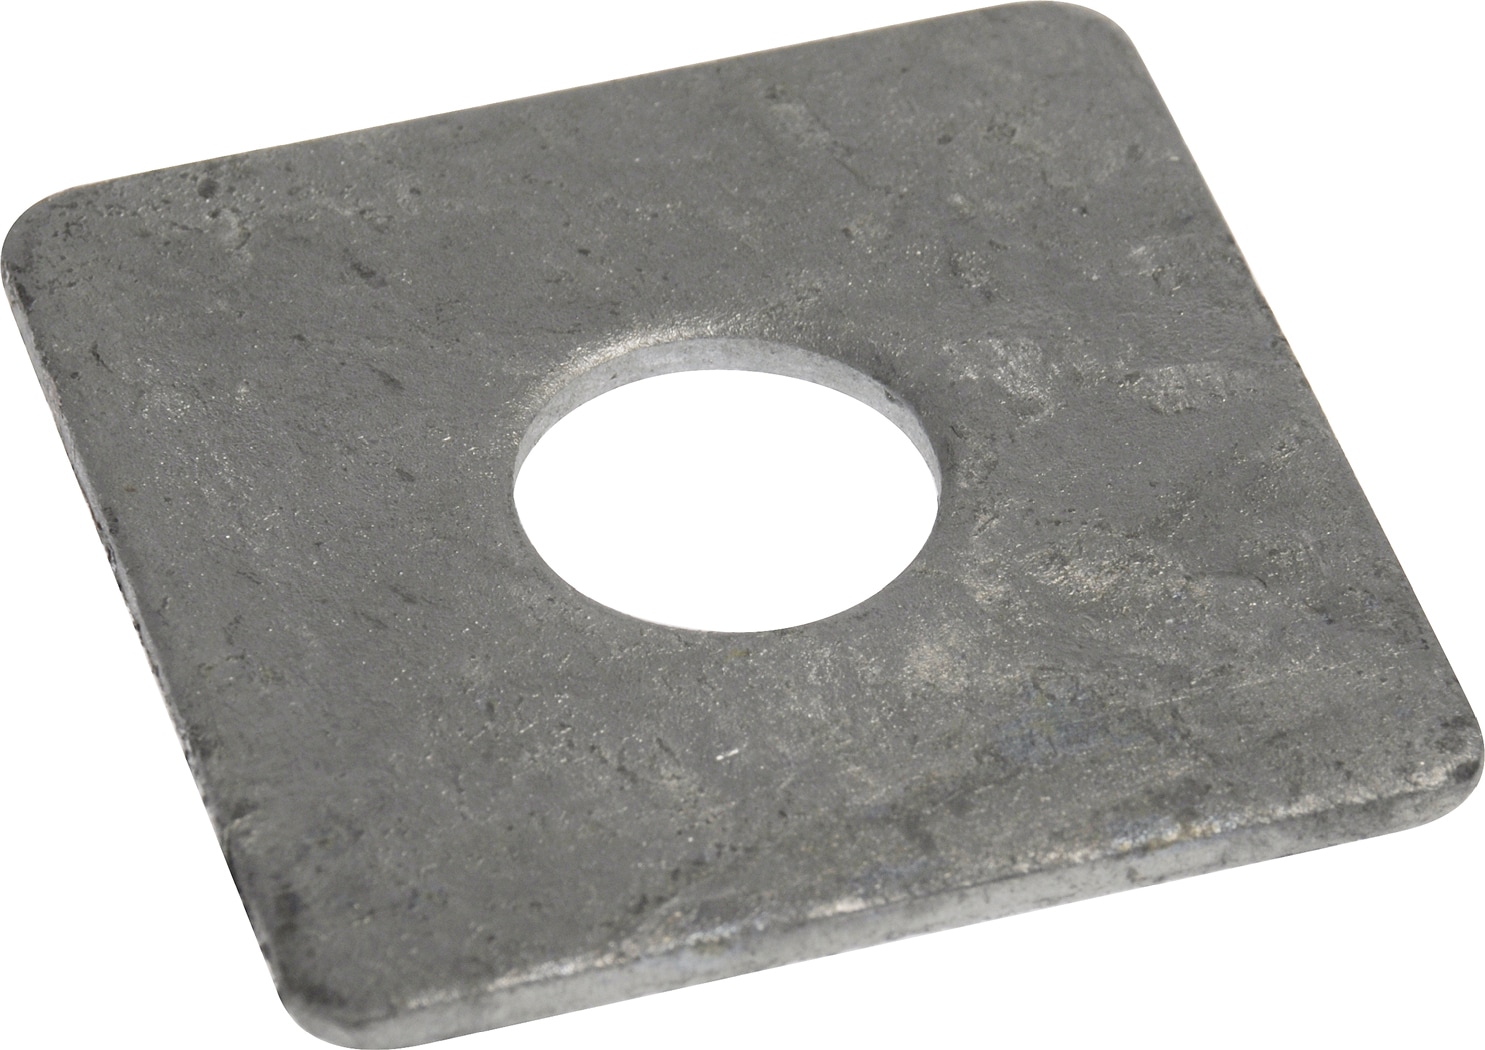 Sizes 1/2" To 1" Square Washers Hot Dip Galvanized Steel Square Plate Washers 